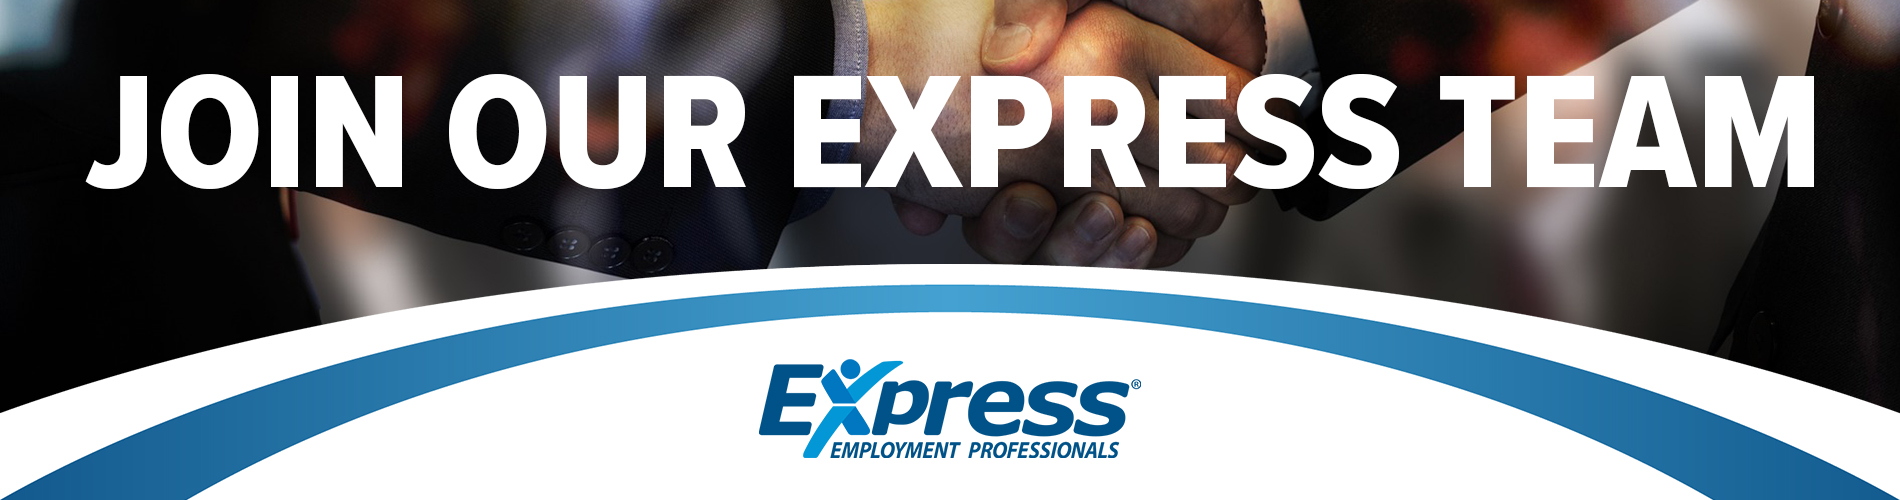 Join Our Express Team, Staffing Industry Jobs in Lakewood, CO